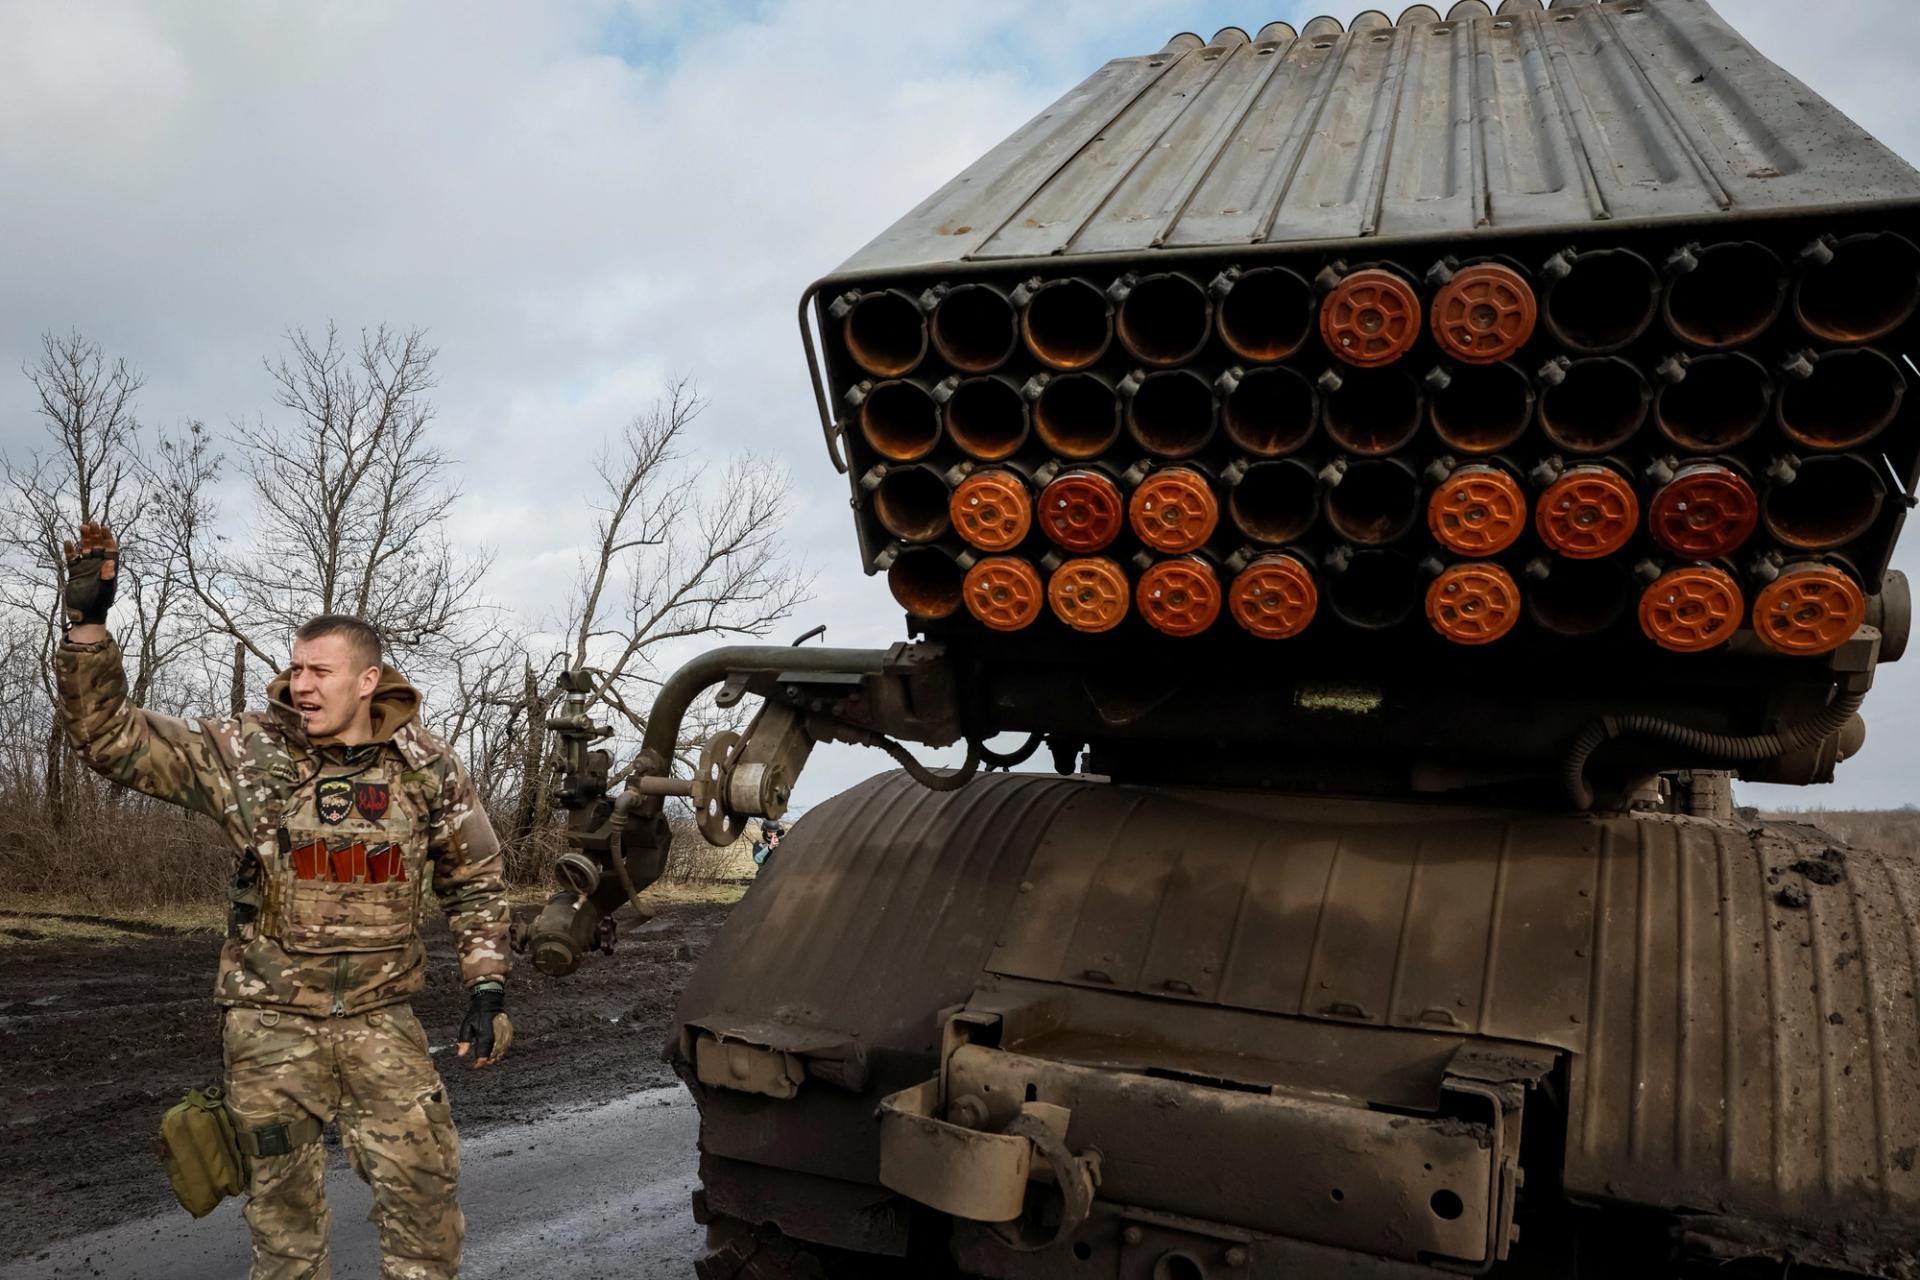 A Ukrainian soldier prepares to fire a BM-21 Grad multiple launch rocket system towards Russian troops near a frontline, amid Russia's attack on Ukraine in the Donetsk region on Feb. 4..